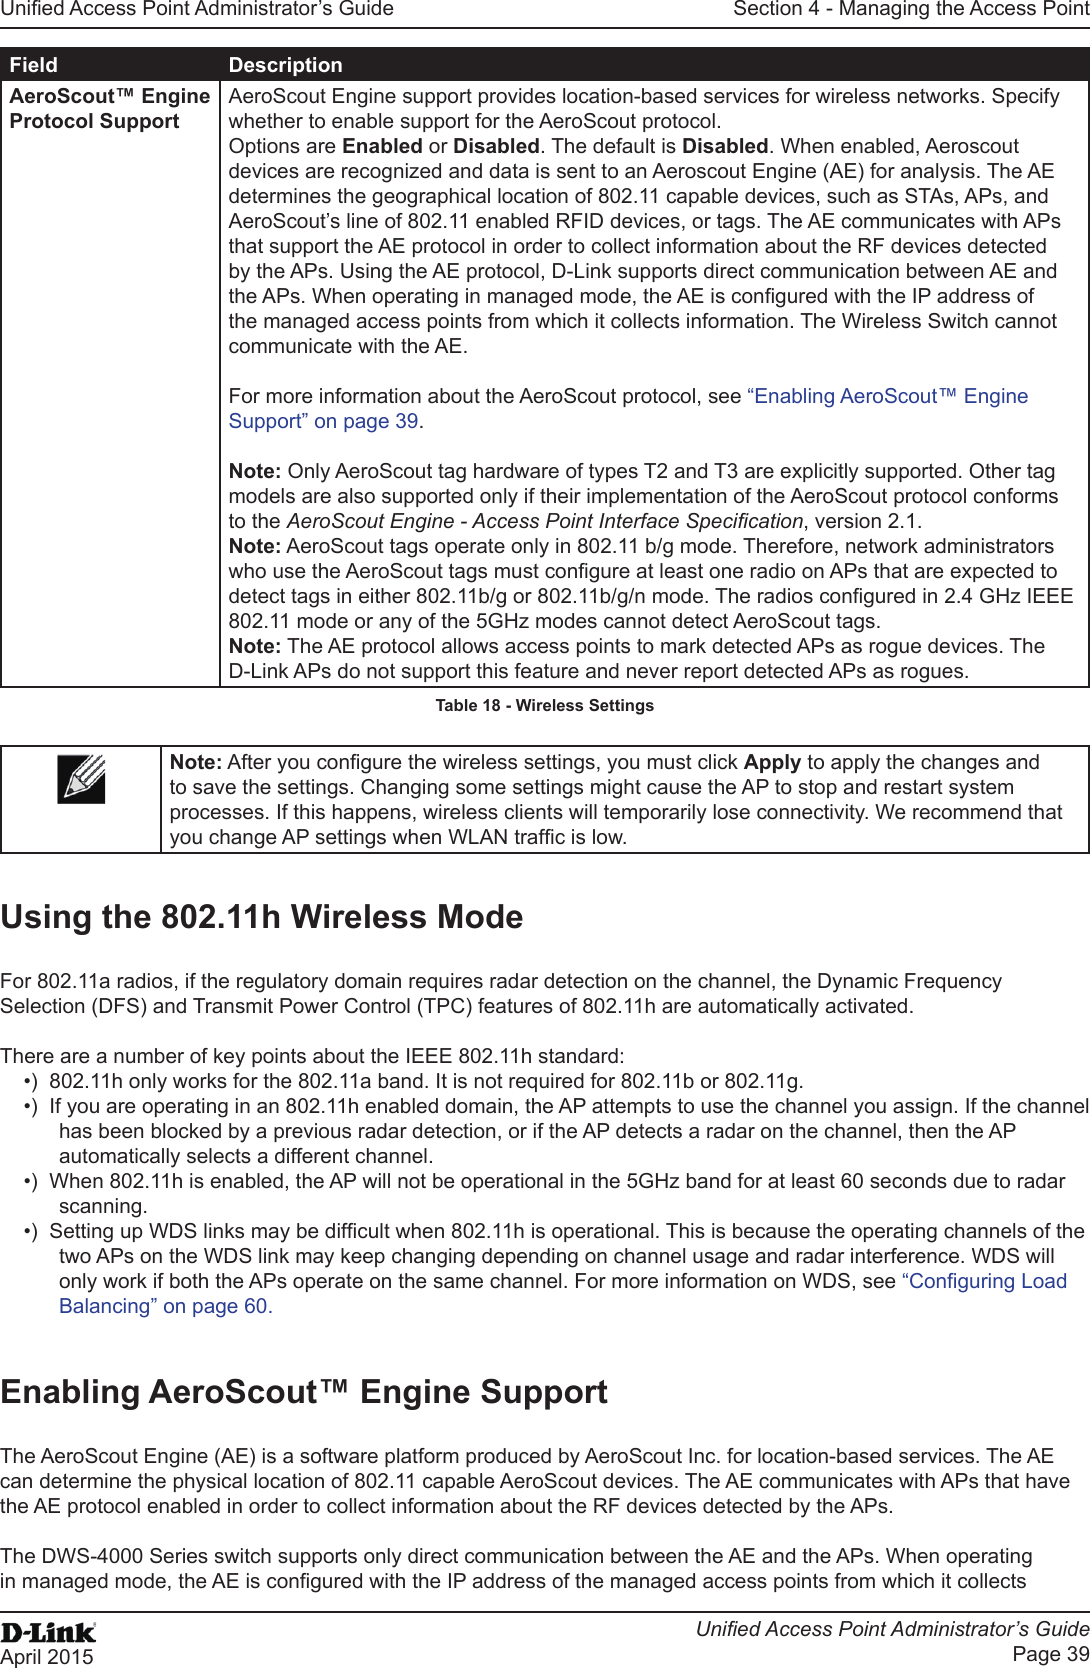 Unied Access Point Administrator’s GuideUnied Access Point Administrator’s GuidePage 39April 2015Section 4 - Managing the Access PointField DescriptionAeroScout™ Engine Protocol SupportAeroScout Engine support provides location-based services for wireless networks. Specify whether to enable support for the AeroScout protocol. Options are Enabled or Disabled. The default is Disabled. When enabled, Aeroscout devices are recognized and data is sent to an Aeroscout Engine (AE) for analysis. The AE determines the geographical location of 802.11 capable devices, such as STAs, APs, and AeroScout’s line of 802.11 enabled RFID devices, or tags. The AE communicates with APs that support the AE protocol in order to collect information about the RF devices detected by the APs. Using the AE protocol, D-Link supports direct communication between AE and the APs. When operating in managed mode, the AE is congured with the IP address of the managed access points from which it collects information. The Wireless Switch cannot communicate with the AE.For more information about the AeroScout protocol, see “Enabling AeroScout™ Engine Support” on page 39.Note: Only AeroScout tag hardware of types T2 and T3 are explicitly supported. Other tag models are also supported only if their implementation of the AeroScout protocol conforms to the AeroScout Engine - Access Point Interface Specication, version 2.1.Note: AeroScout tags operate only in 802.11 b/g mode. Therefore, network administrators who use the AeroScout tags must congure at least one radio on APs that are expected to detect tags in either 802.11b/g or 802.11b/g/n mode. The radios congured in 2.4 GHz IEEE 802.11 mode or any of the 5GHz modes cannot detect AeroScout tags.Note: The AE protocol allows access points to mark detected APs as rogue devices. The D-Link APs do not support this feature and never report detected APs as rogues.Table 18 - Wireless SettingsNote: After you congure the wireless settings, you must click Apply to apply the changes and to save the settings. Changing some settings might cause the AP to stop and restart system processes. If this happens, wireless clients will temporarily lose connectivity. We recommend that you change AP settings when WLAN trafc is low.Using the 802.11h Wireless ModeFor 802.11a radios, if the regulatory domain requires radar detection on the channel, the Dynamic Frequency Selection (DFS) and Transmit Power Control (TPC) features of 802.11h are automatically activated.There are a number of key points about the IEEE 802.11h standard:•)  802.11h only works for the 802.11a band. It is not required for 802.11b or 802.11g.•)  If you are operating in an 802.11h enabled domain, the AP attempts to use the channel you assign. If the channel has been blocked by a previous radar detection, or if the AP detects a radar on the channel, then the AP automatically selects a different channel. •)  When 802.11h is enabled, the AP will not be operational in the 5GHz band for at least 60 seconds due to radar scanning.•)  Setting up WDS links may be difcult when 802.11h is operational. This is because the operating channels of the two APs on the WDS link may keep changing depending on channel usage and radar interference. WDS will only work if both the APs operate on the same channel. For more information on WDS, see “Conguring Load Balancing” on page 60.Enabling AeroScout™ Engine SupportThe AeroScout Engine (AE) is a software platform produced by AeroScout Inc. for location-based services. The AE can determine the physical location of 802.11 capable AeroScout devices. The AE communicates with APs that have the AE protocol enabled in order to collect information about the RF devices detected by the APs.The DWS-4000 Series switch supports only direct communication between the AE and the APs. When operating in managed mode, the AE is congured with the IP address of the managed access points from which it collects 